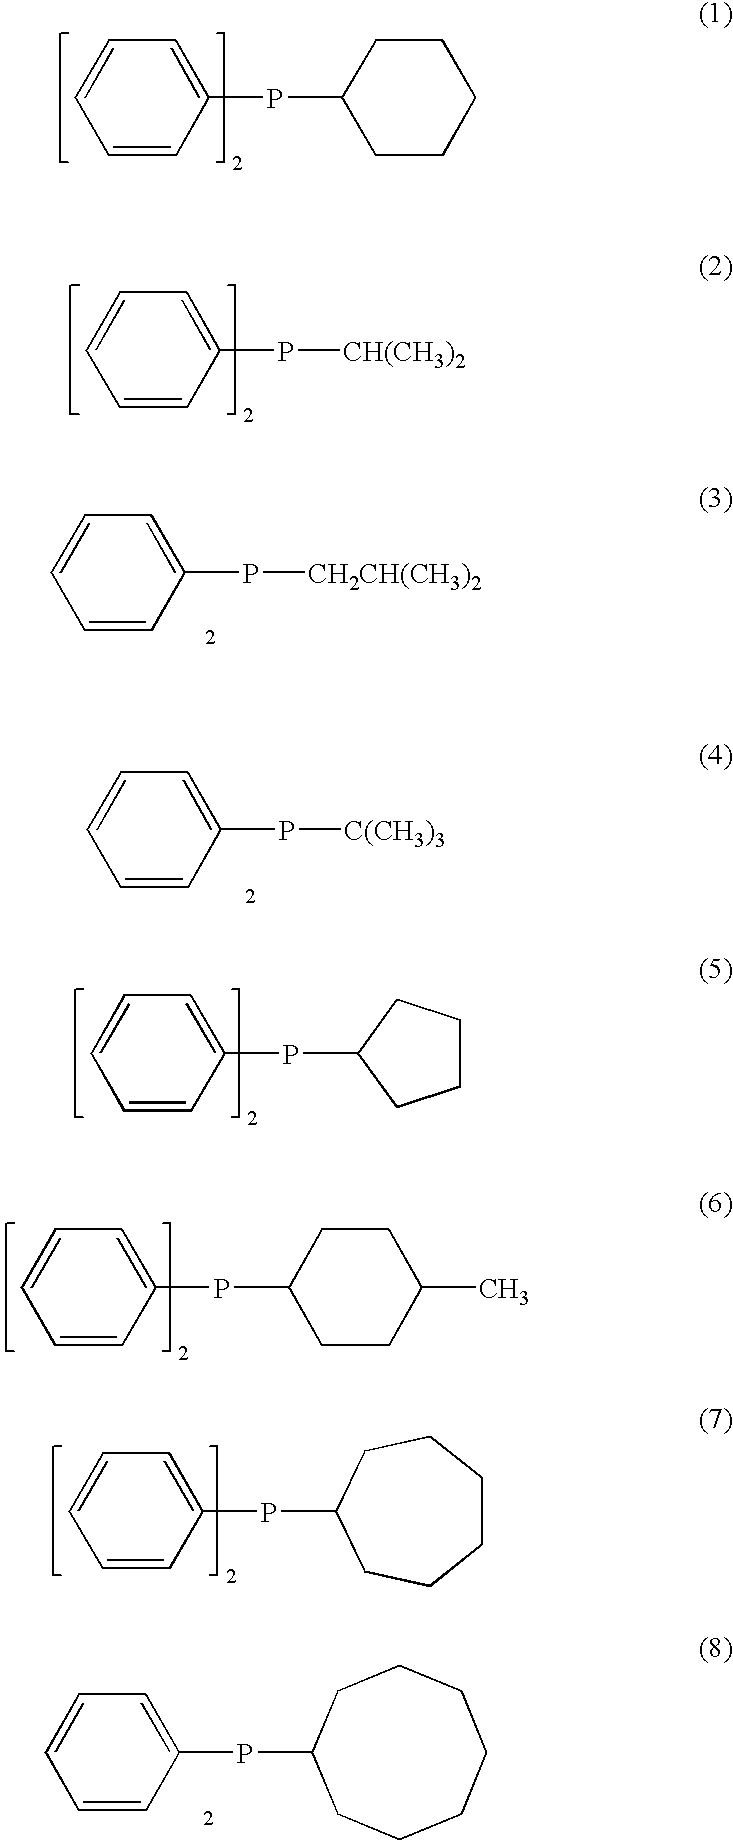 Process for producing crystalline 1,2-polybutadiene